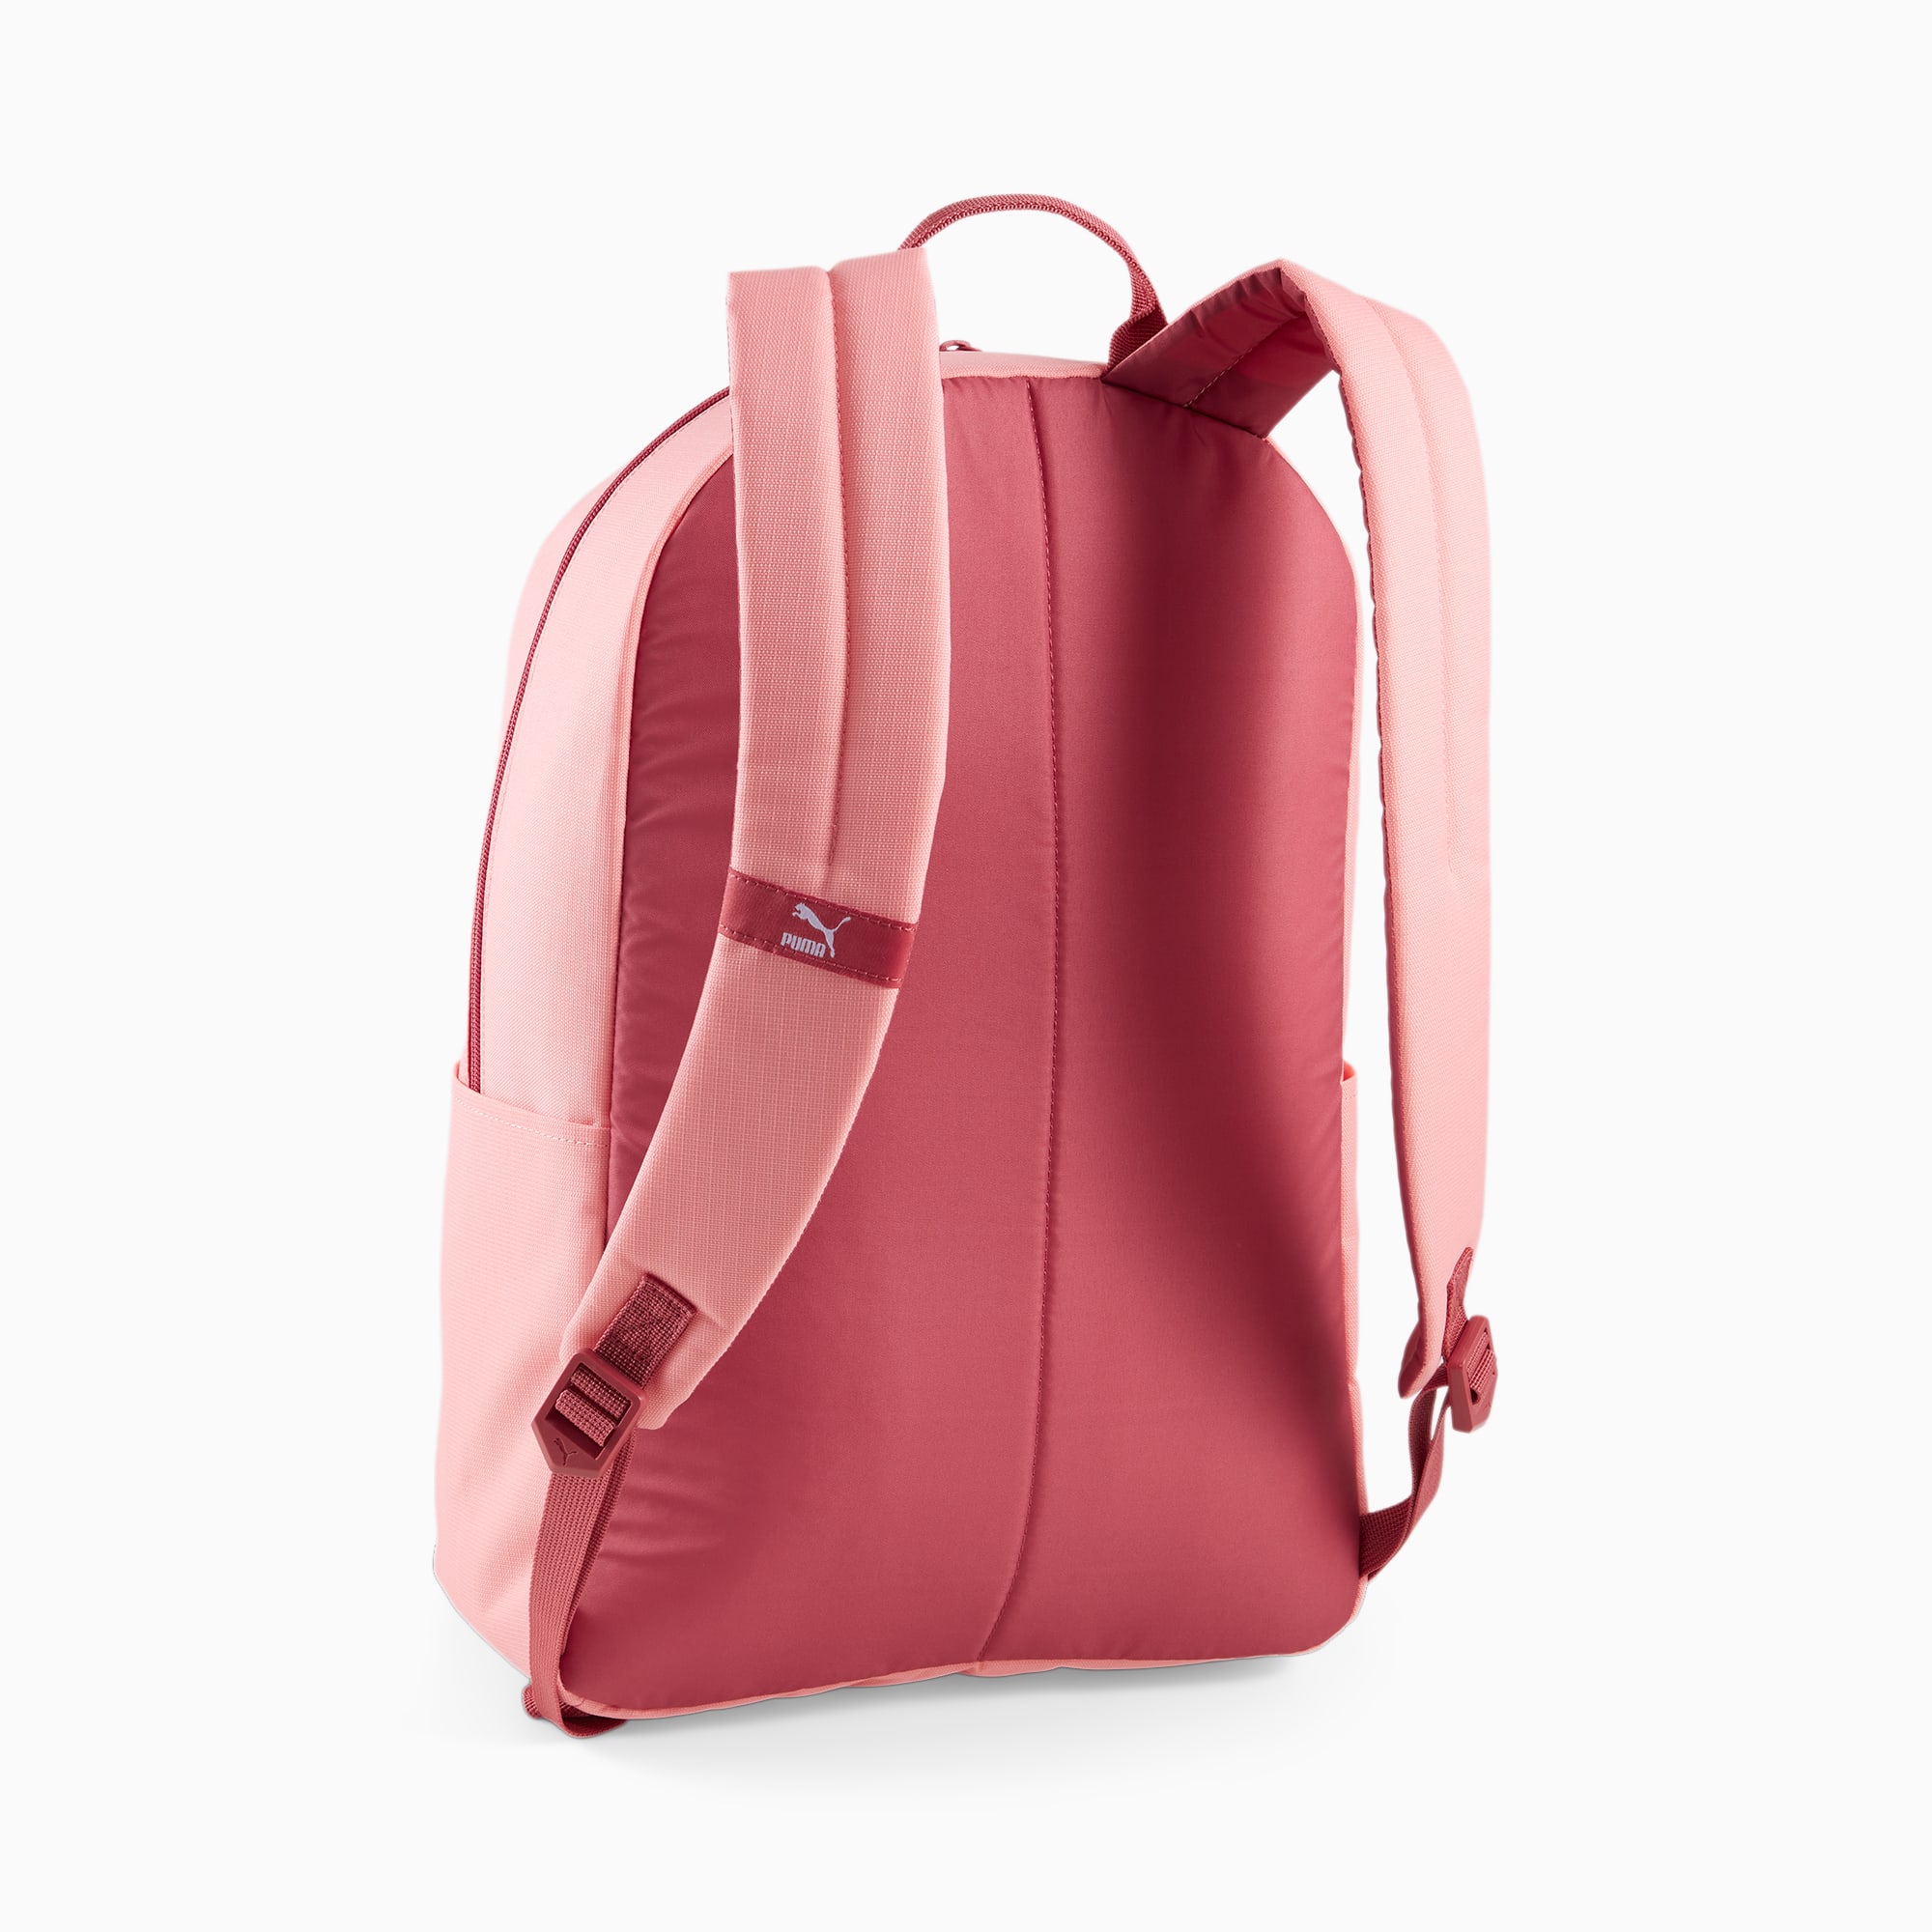 Men's PUMA Classics Archive Backpack, Peach Smoothie, Accessories